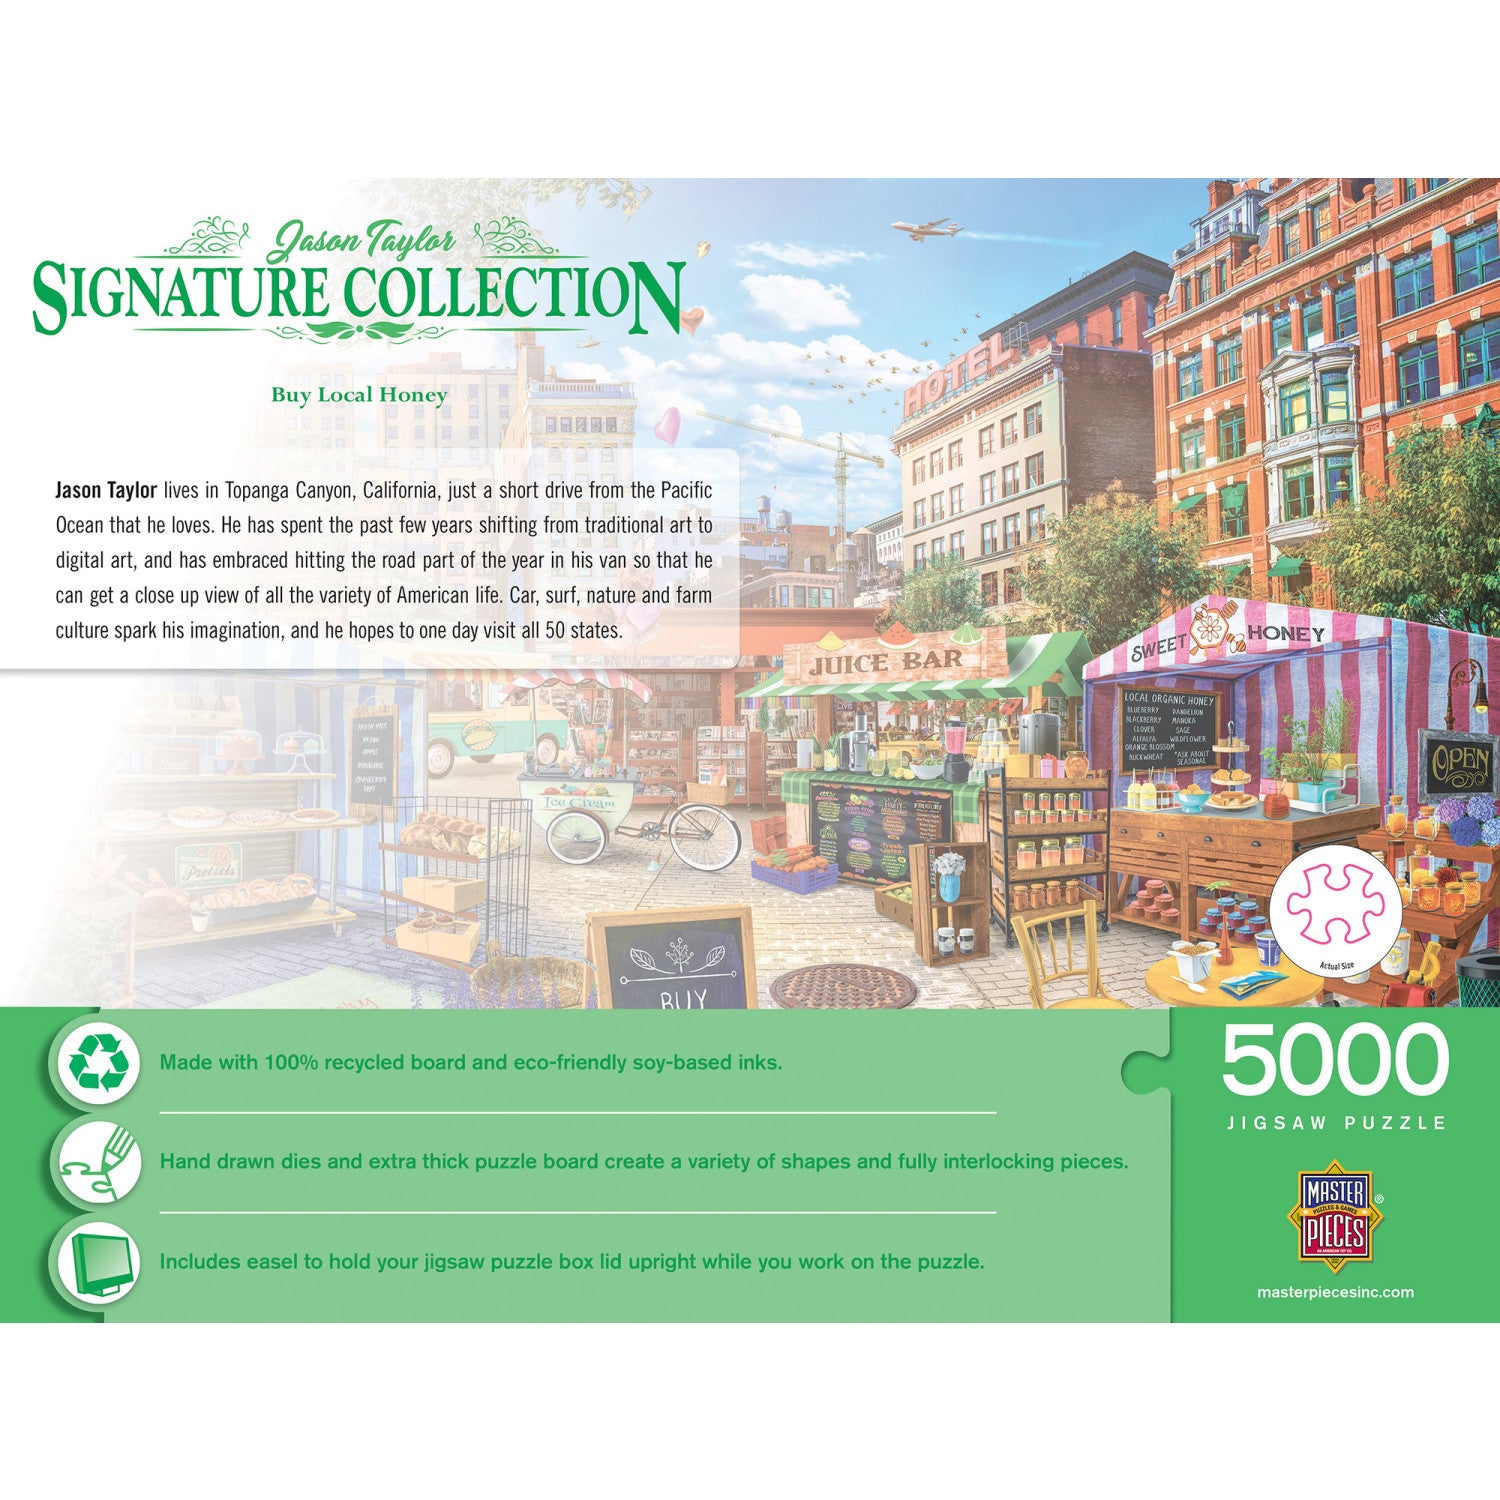 Signature Collection - Buy Local Honey 5000 Piece Jigsaw Puzzle - Flawed